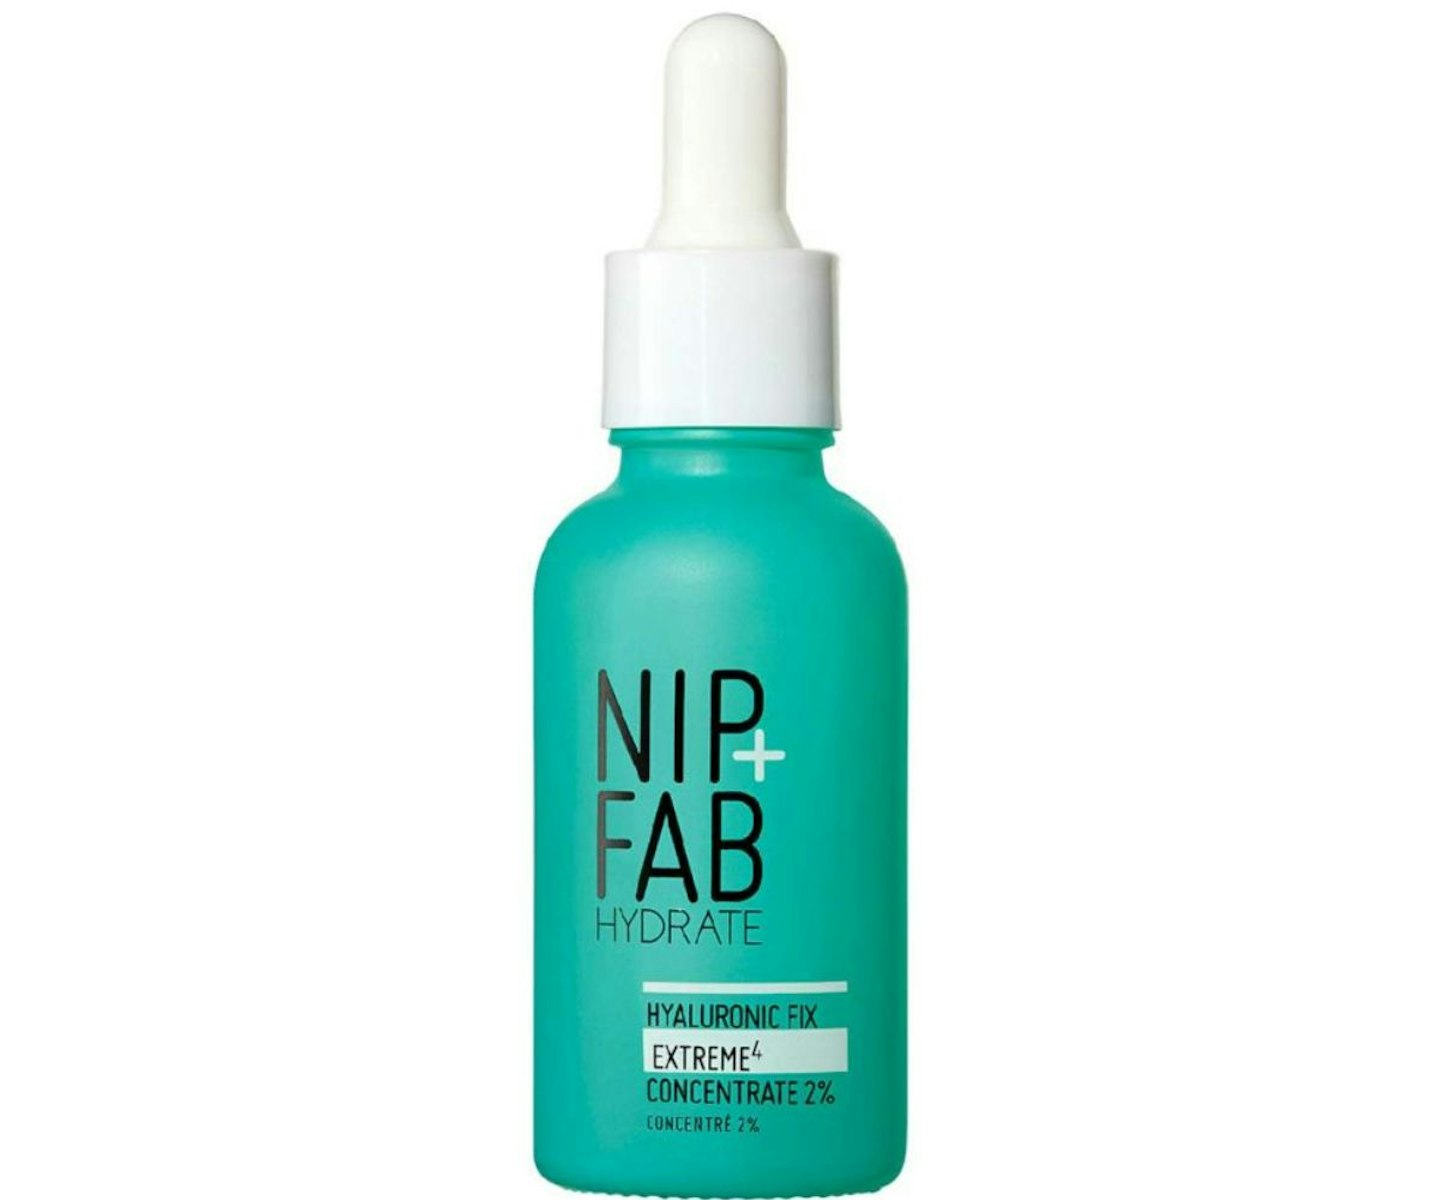 Nip+Fab Hyaluronic Fix Extreme4 2% Hydration Concentrate